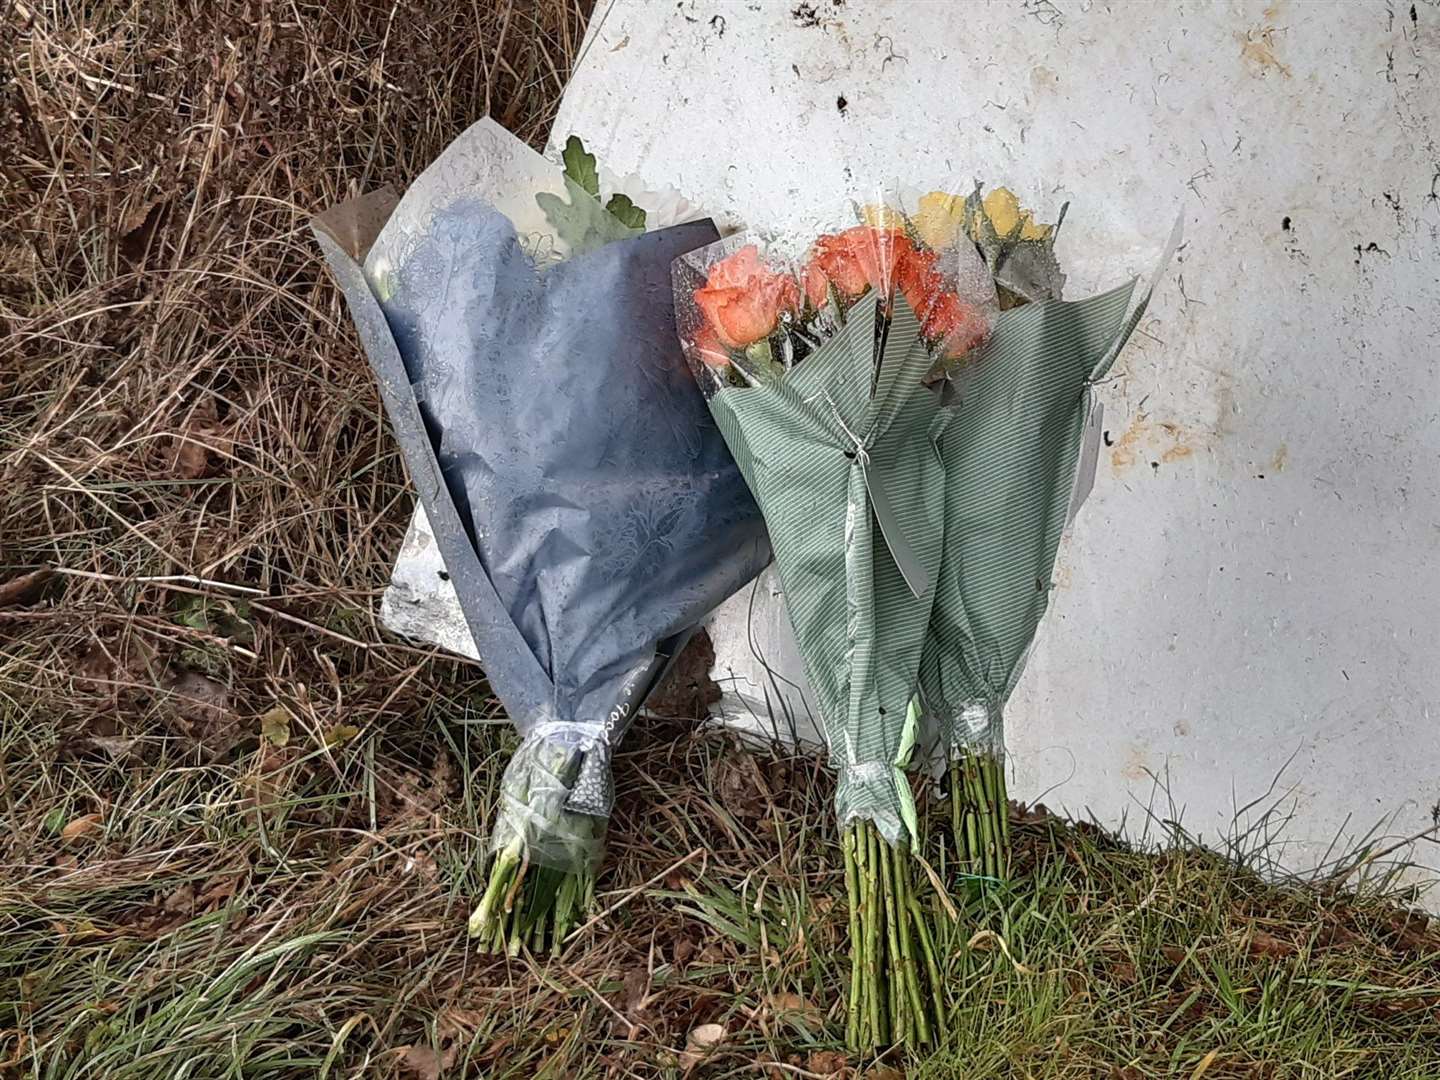 Flowers laid at the site where human remains were found in the search for Sarah Everard (45063057)